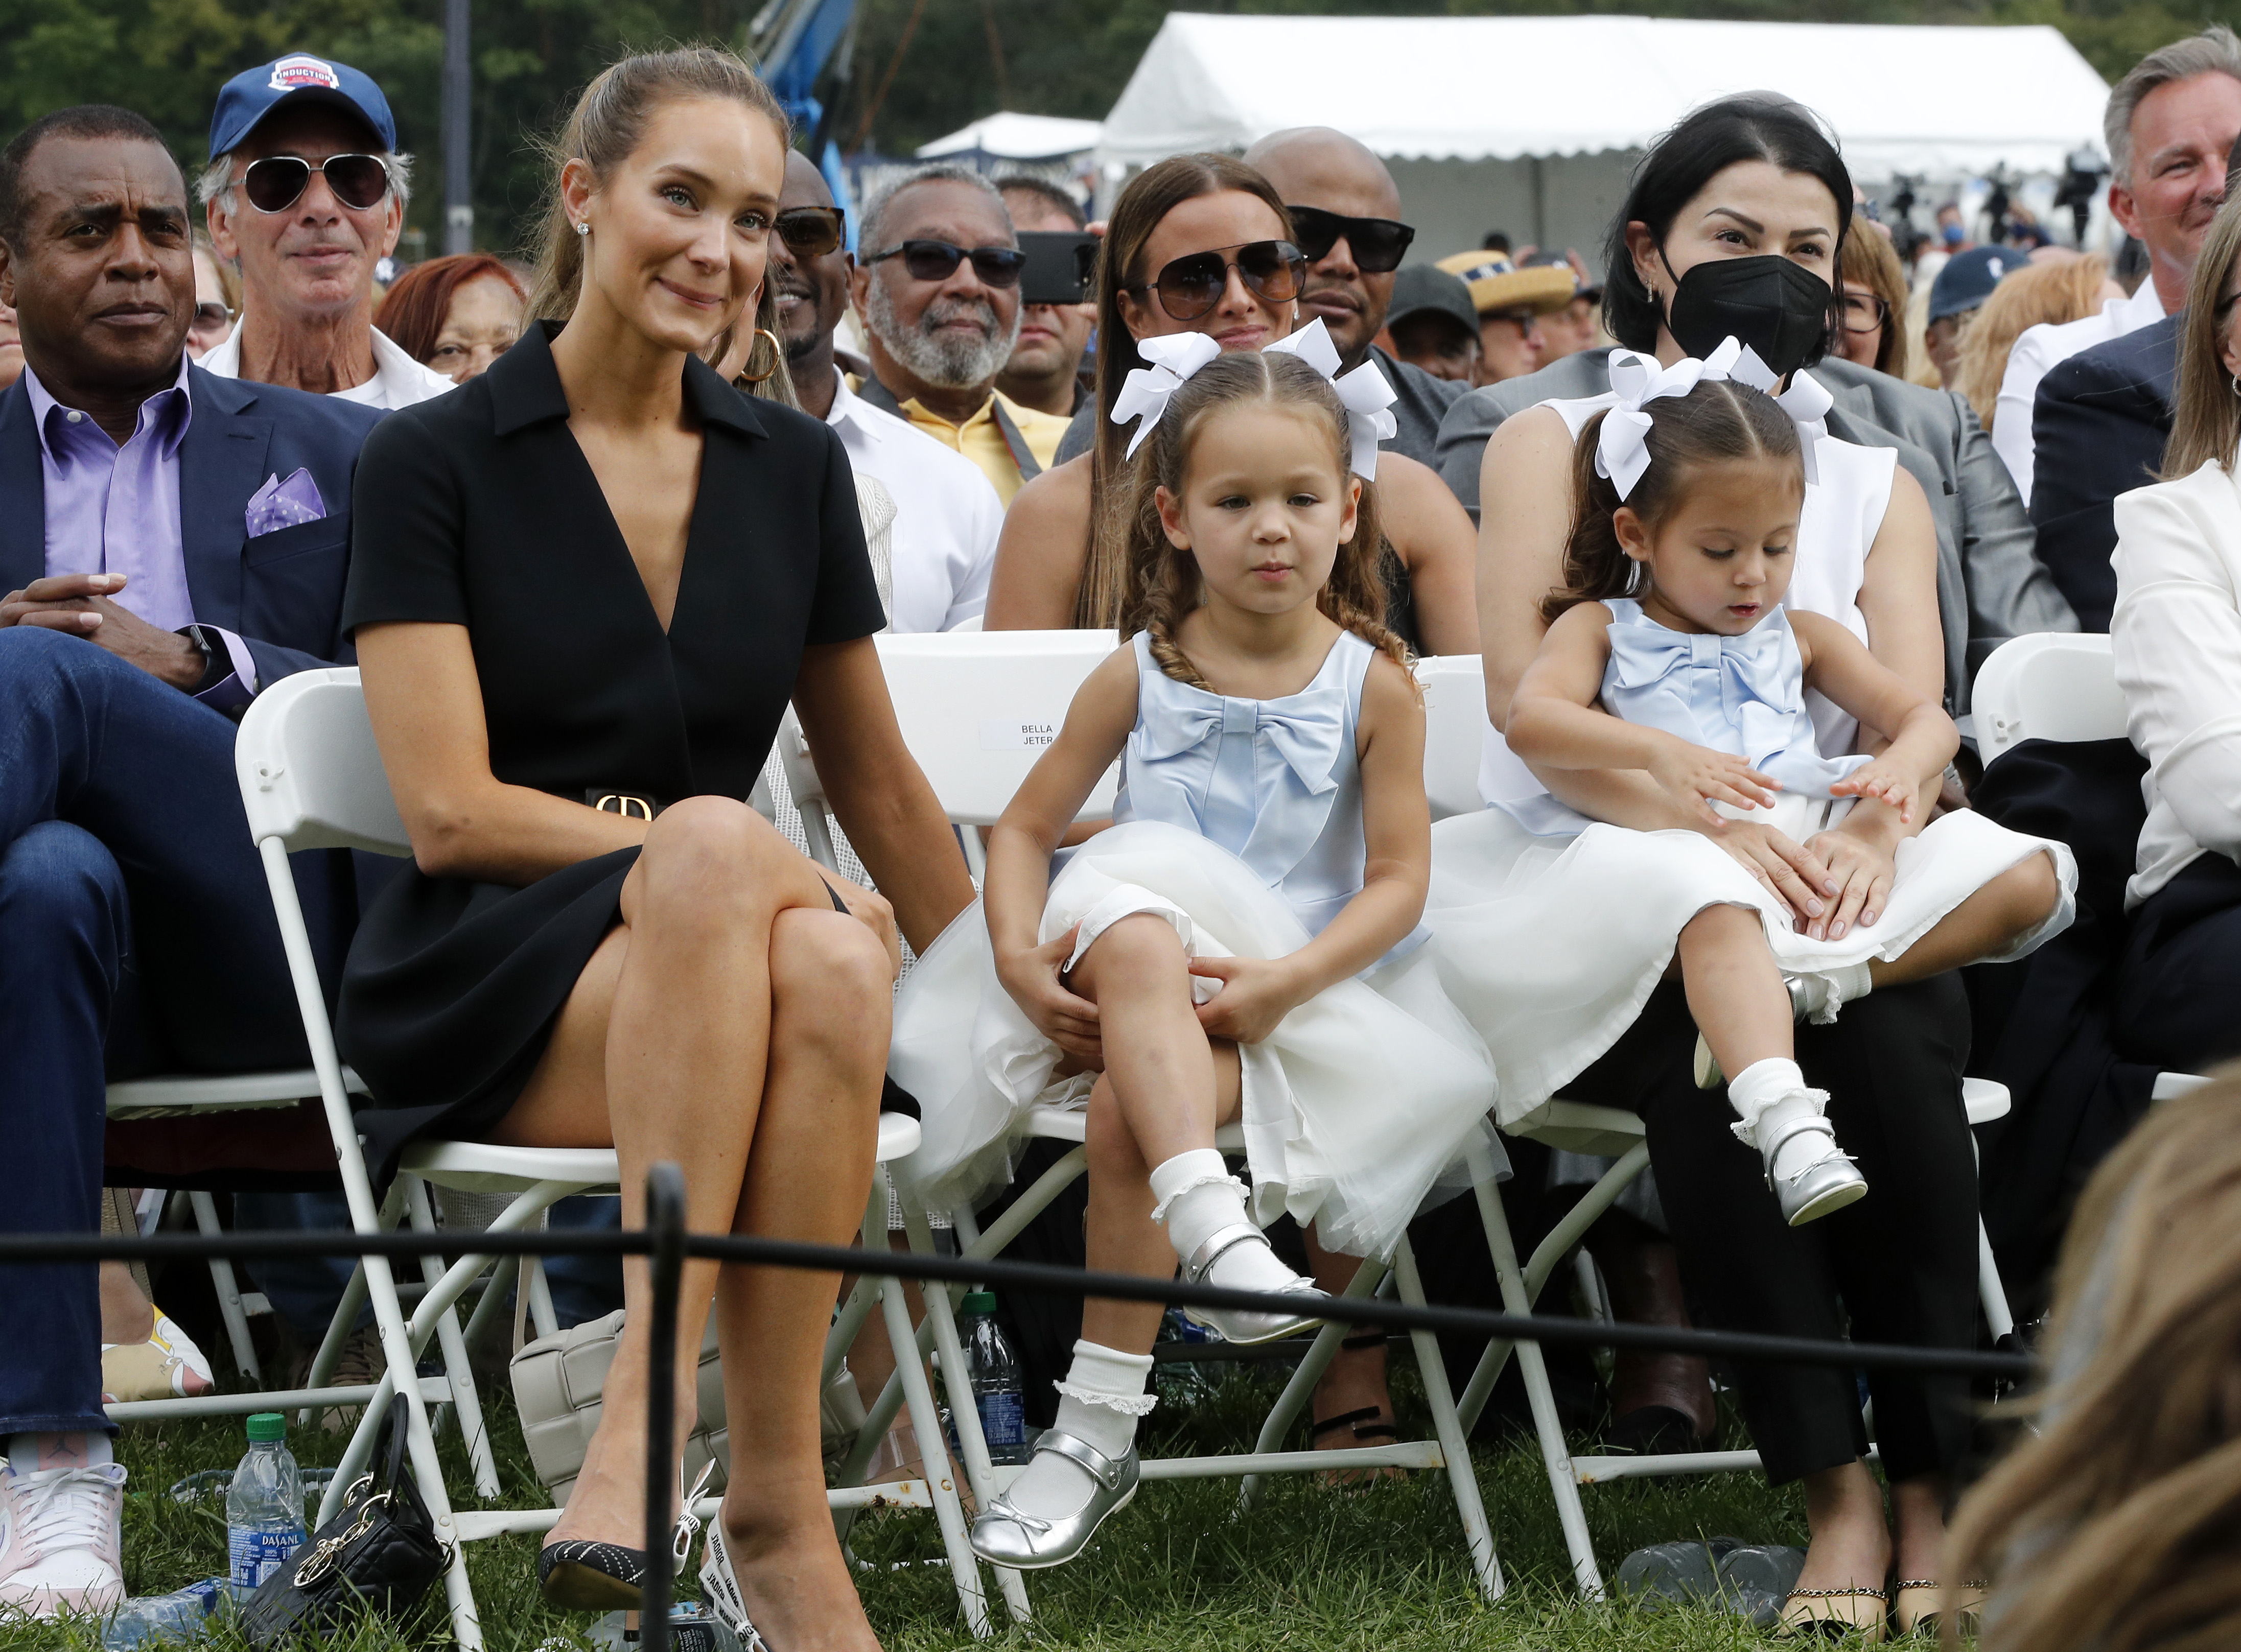 Story Jeter, with her sister Bella and mother Hannah Davis Derek Jeter induction ceremony into the Baseball Hall of Fame in 2021, in New York. | Source: Getty Images